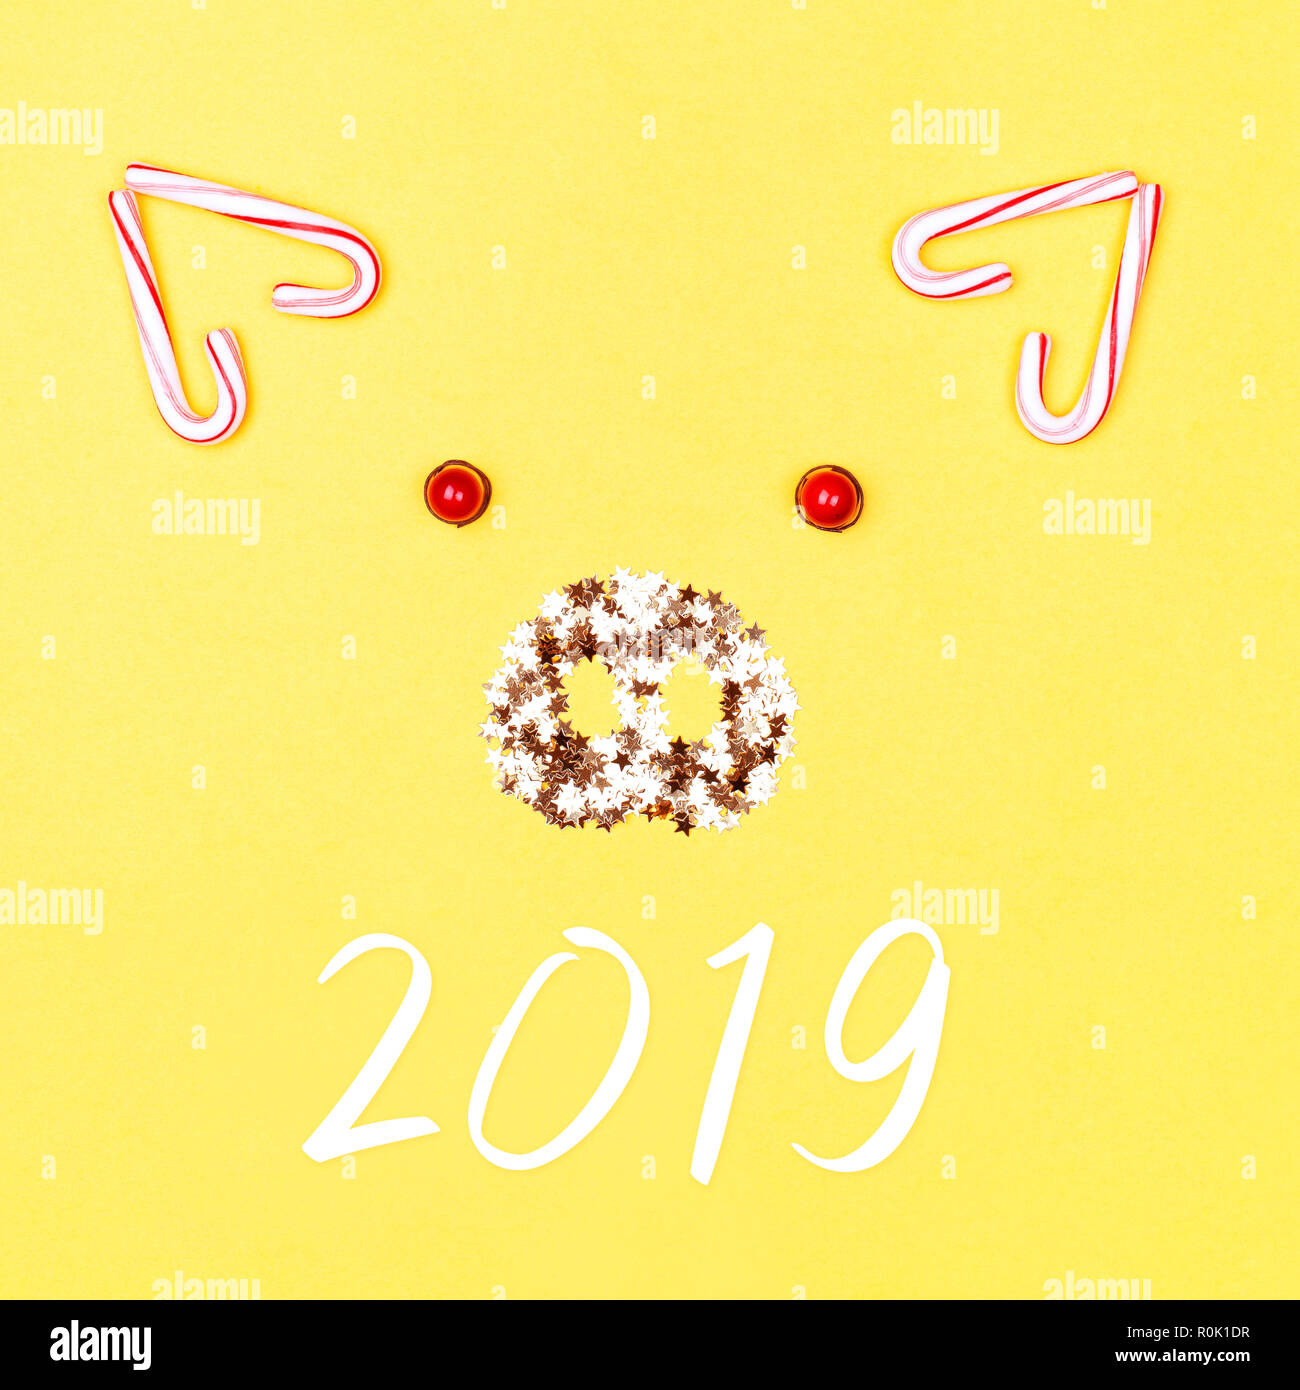 Christmas pig face made of candy cane lollipops and golden confetti on yellow background. Concept of animal 2019. Stock Photo